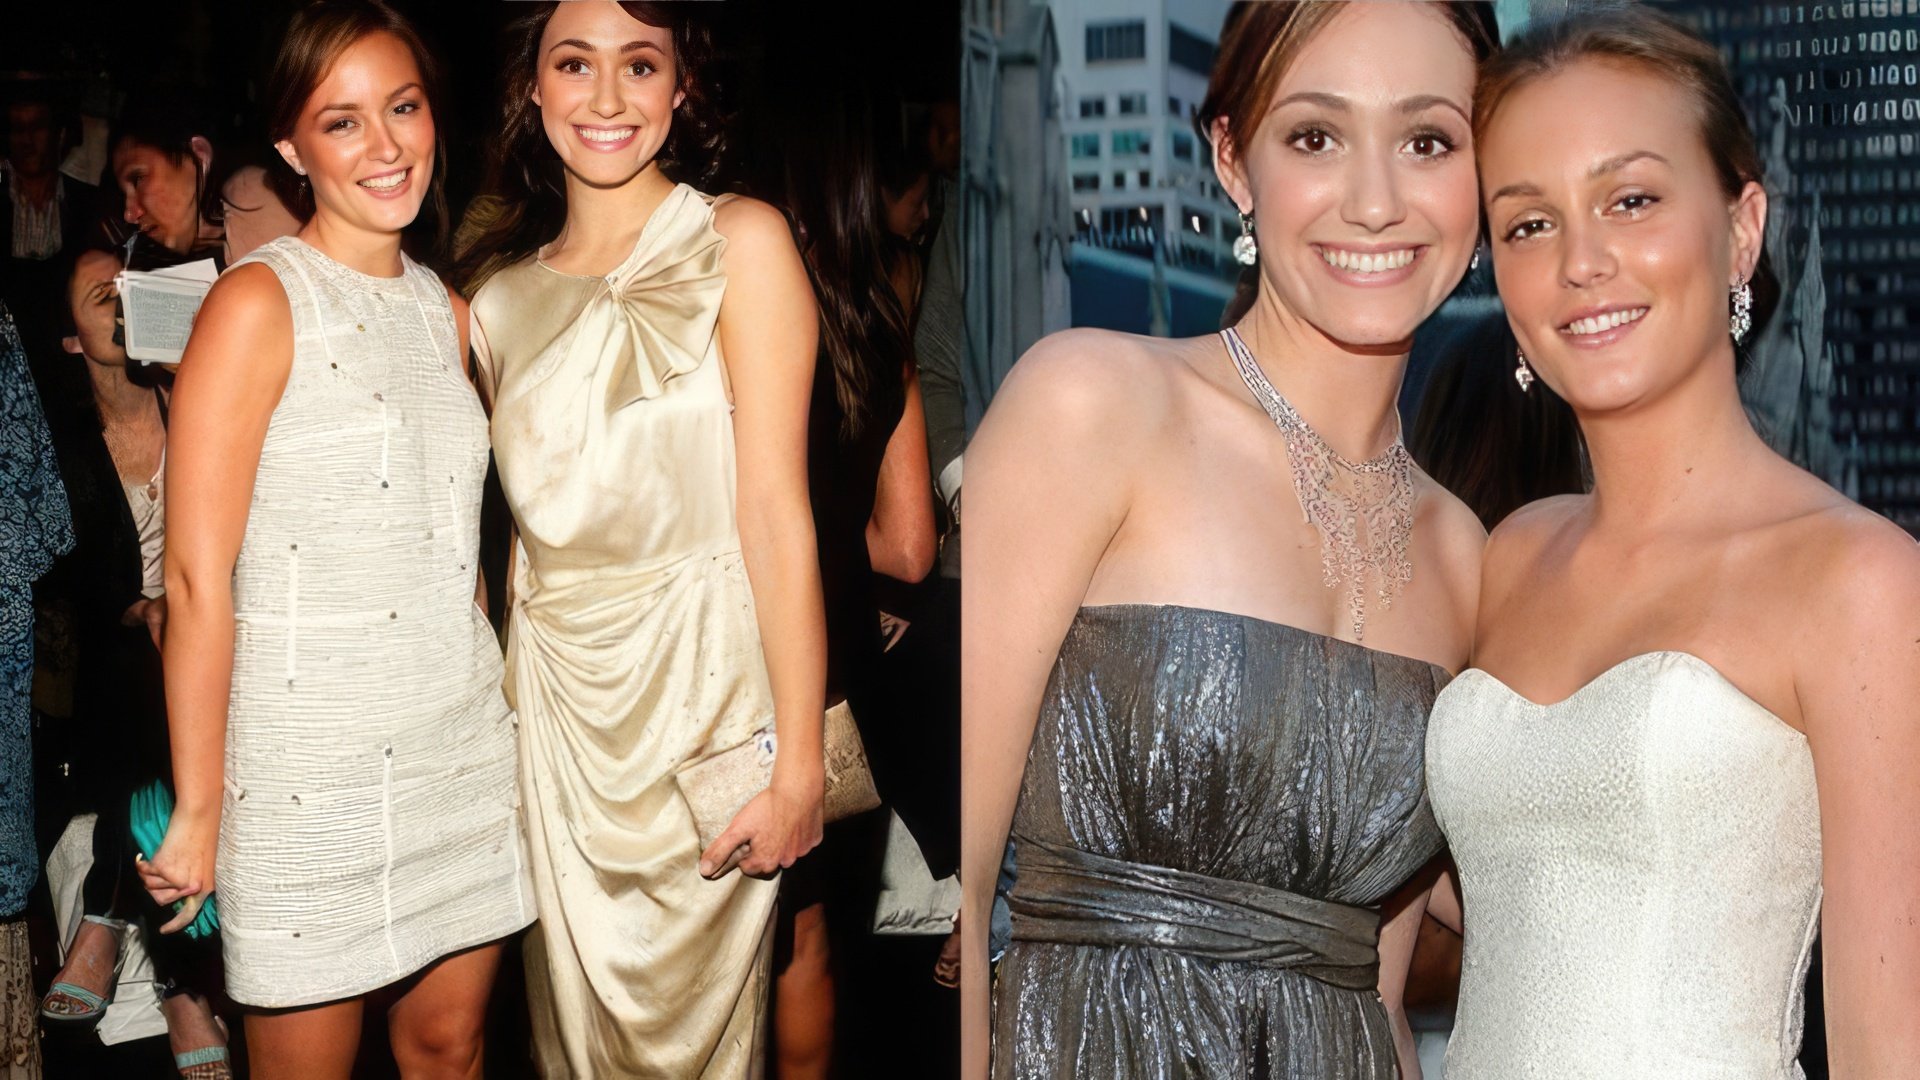 Emmy Rossum and Leighton Meester